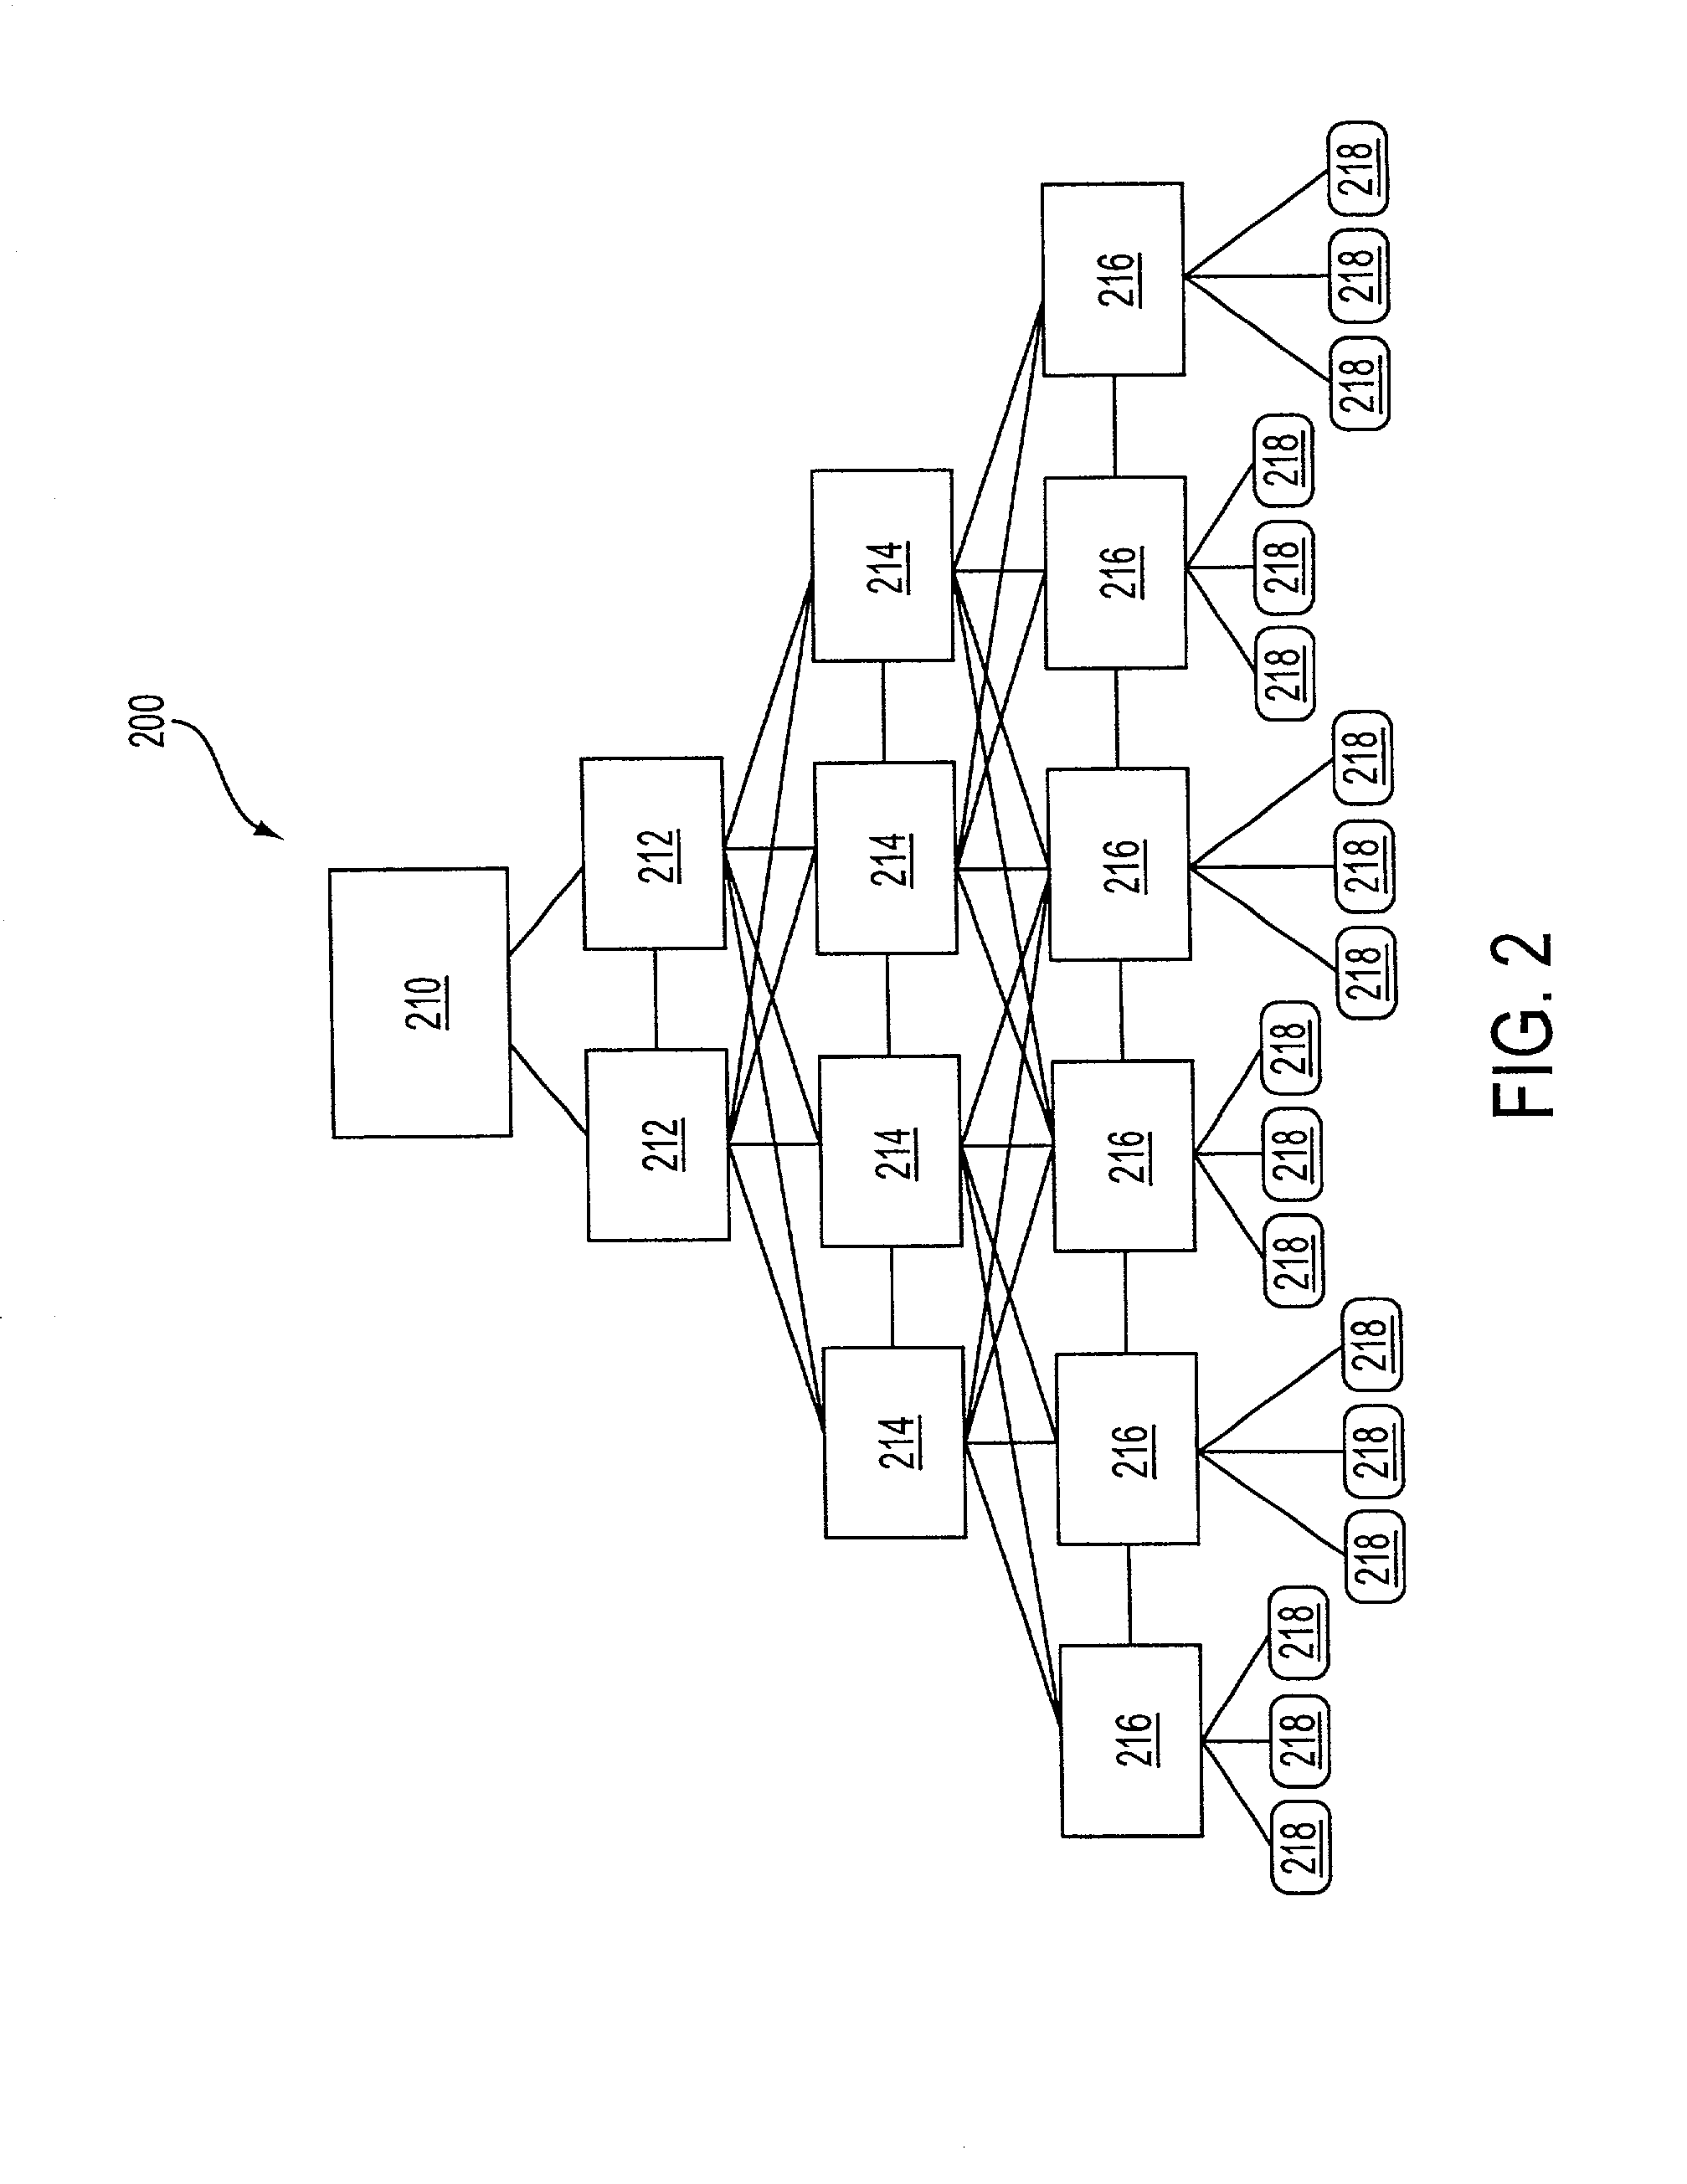 System and method for providing an information network on the internet